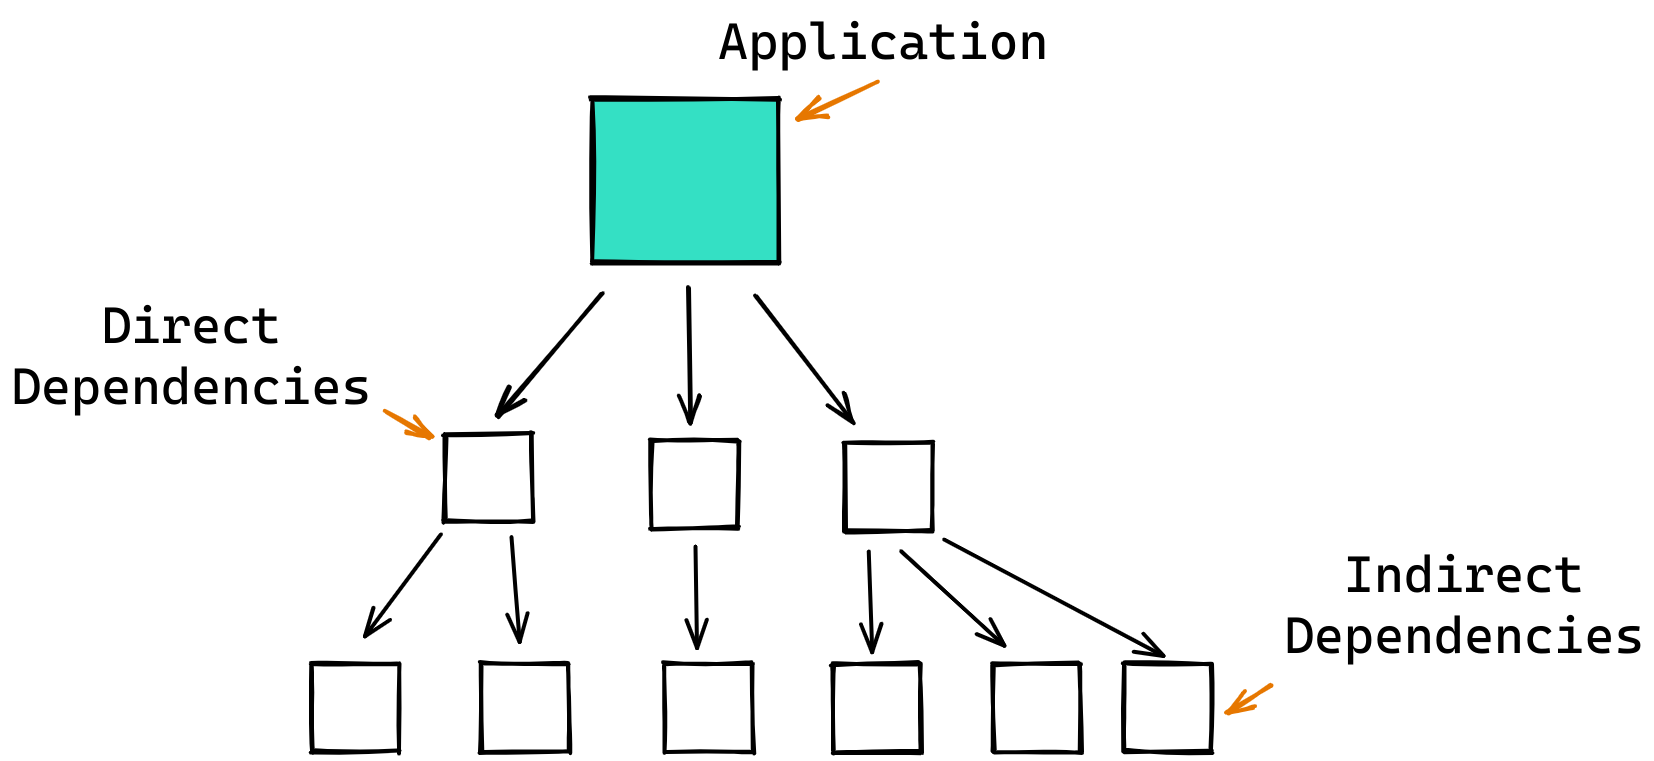 An application may have direct and indirect dependencies.